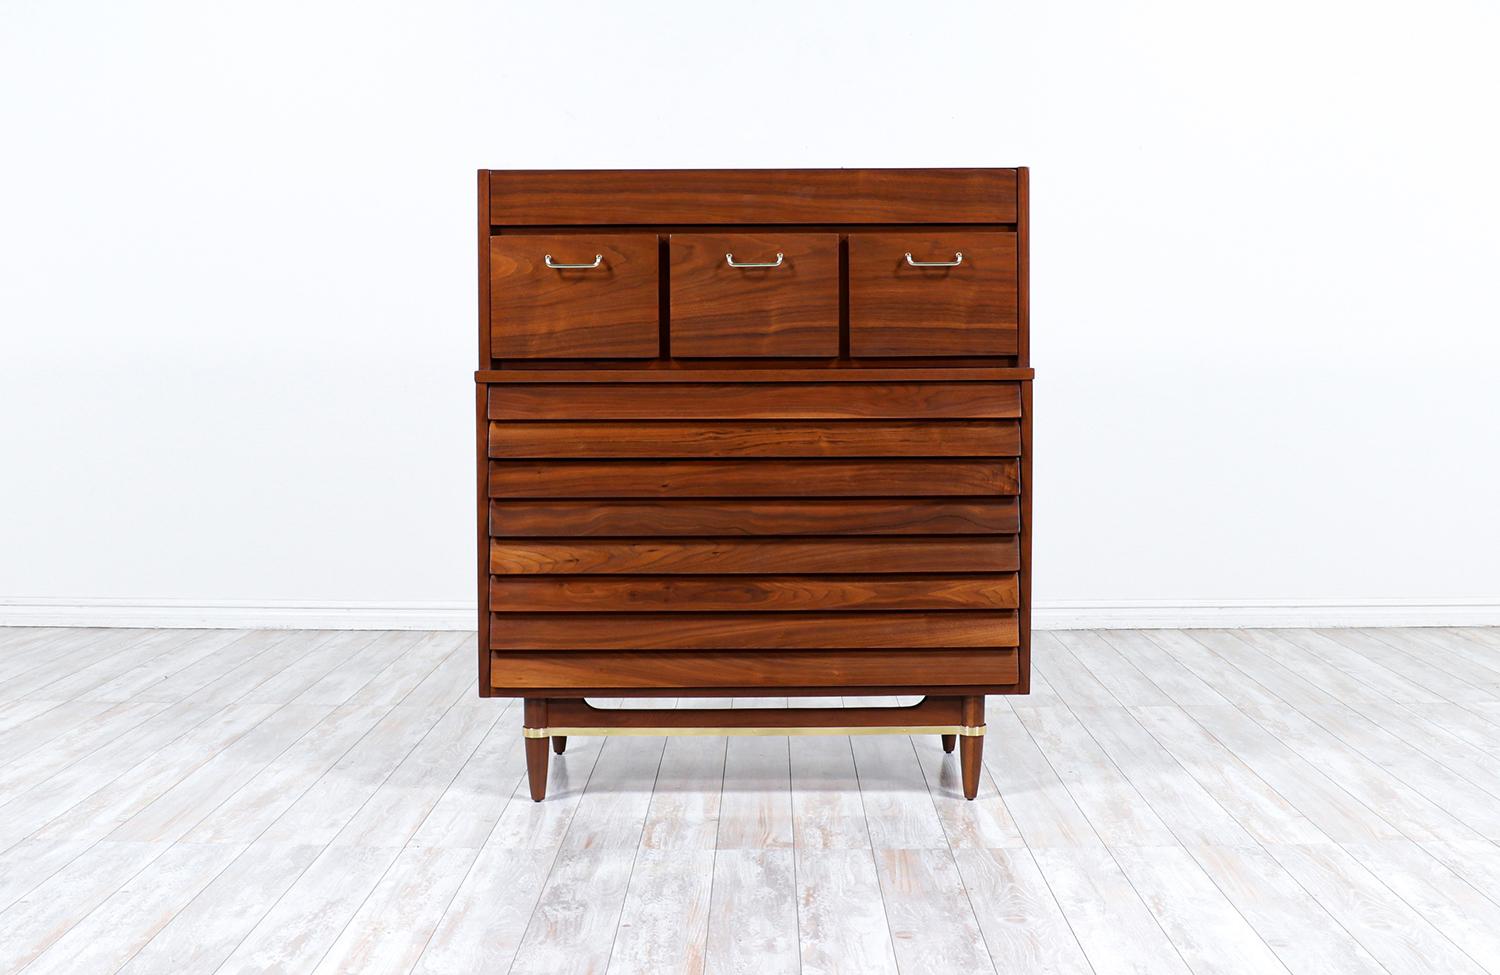 Merton L. Gershun walnut chest of drawers with brass accents for American of Martinsville.

________________________________________

Transforming a piece of Mid-Century Modern furniture is like bringing history back to life, and we take this